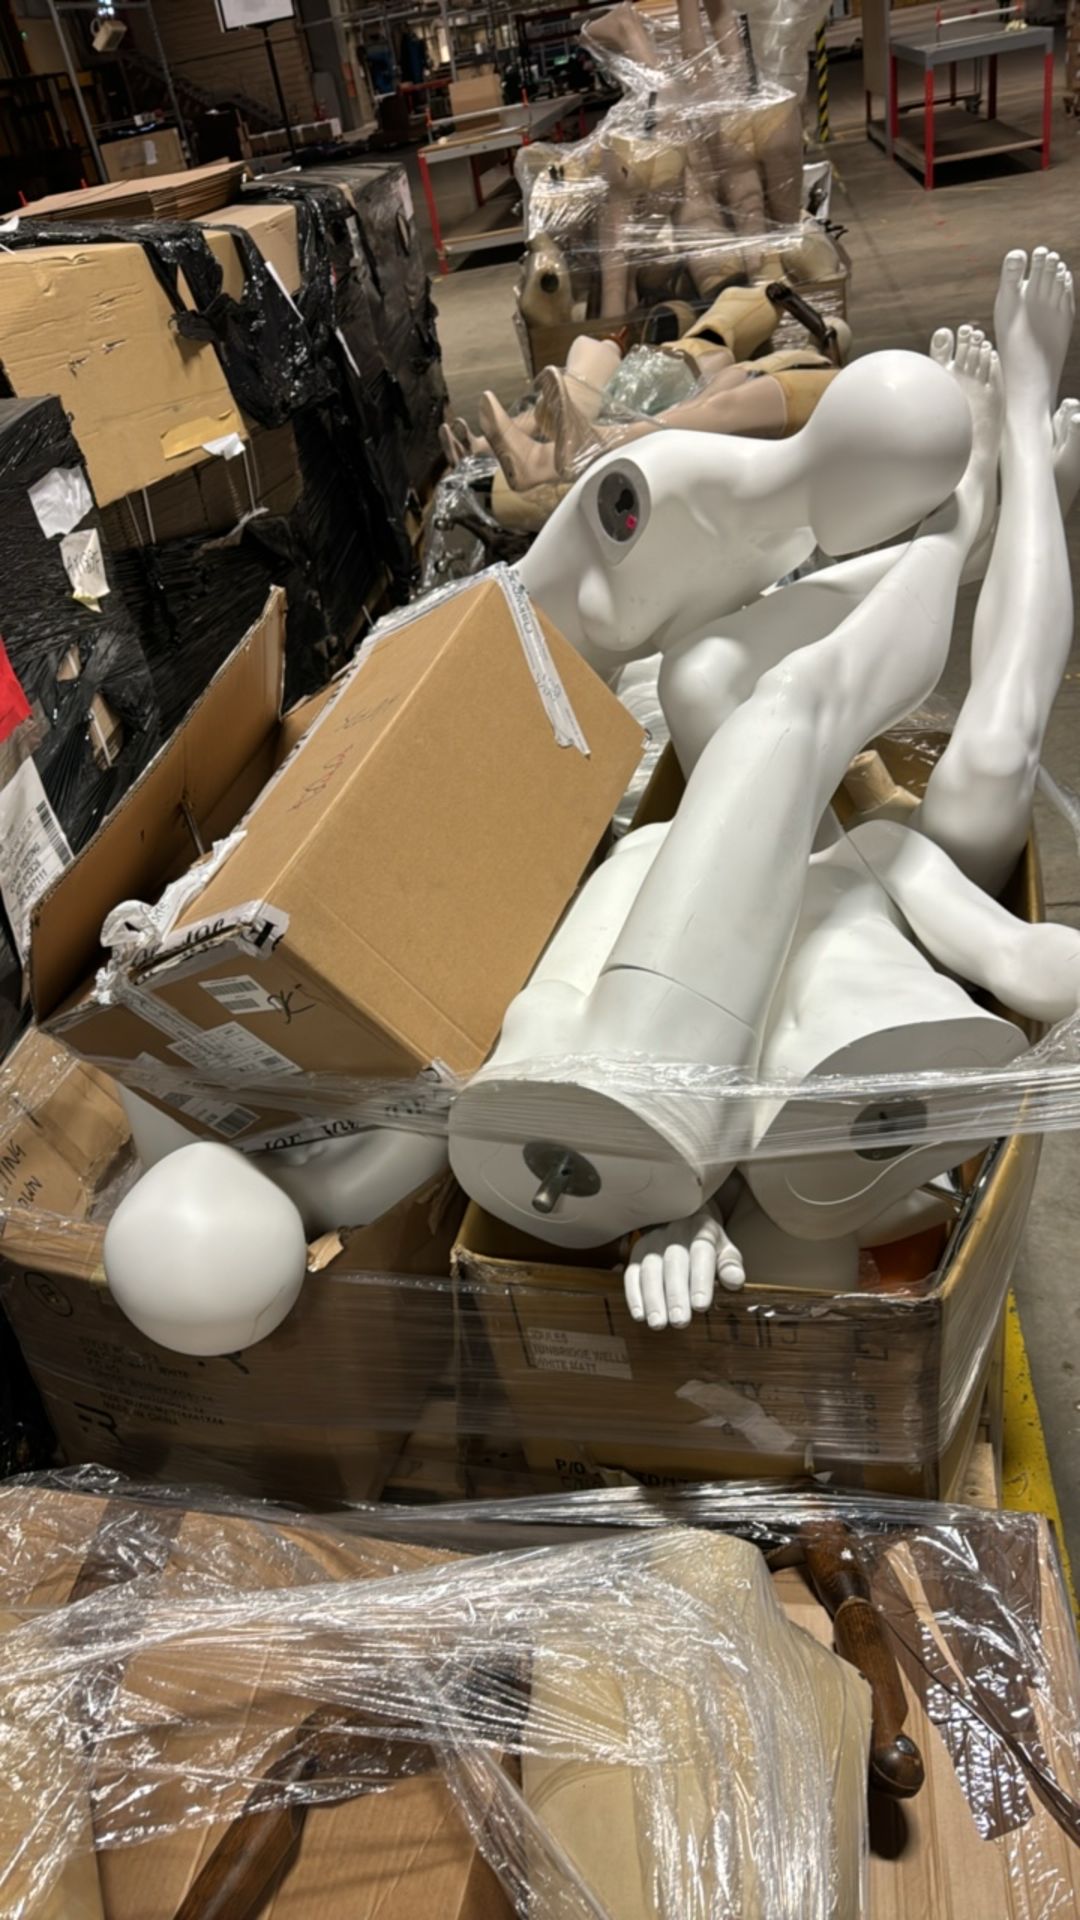 Pallet of Mannequin Parts - Image 3 of 3